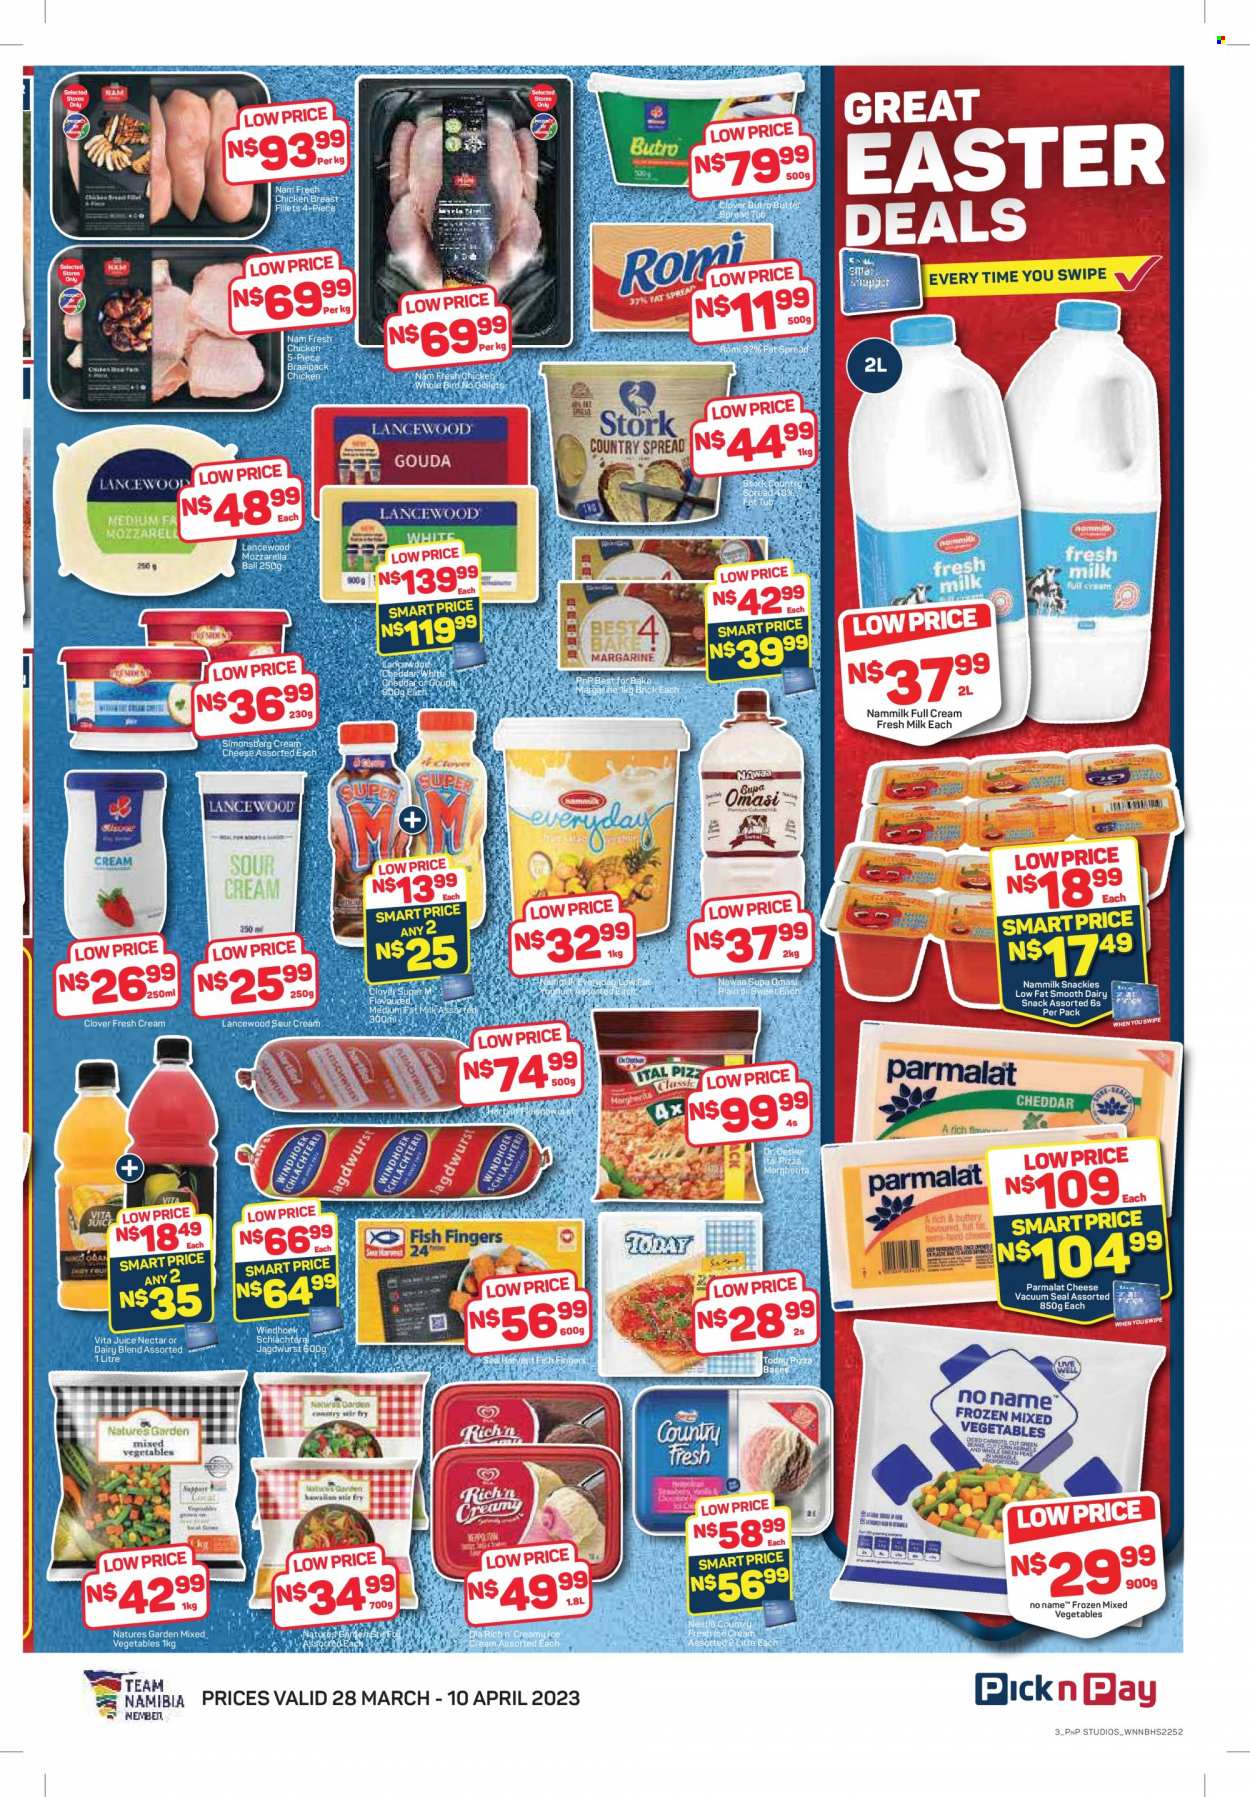 thumbnail - Pick n Pay catalogue  - 28/03/2023 - 10/04/2023 - Sales products - fish, fish fingers, Sea Harvest, fish sticks, cream cheese, gouda, cheddar, cheese, Dr. Oetker, Lancewood, yoghurt, Clover, Parmalat, milk, dairy blend, margarine, fat spread, sour cream, pizza dough, ice cream, Ola, mixed vegetables, Natures Garden, Ital Pizza, Nestlé, snack, juice, whole chicken, chicken breasts, chicken. Page 3.